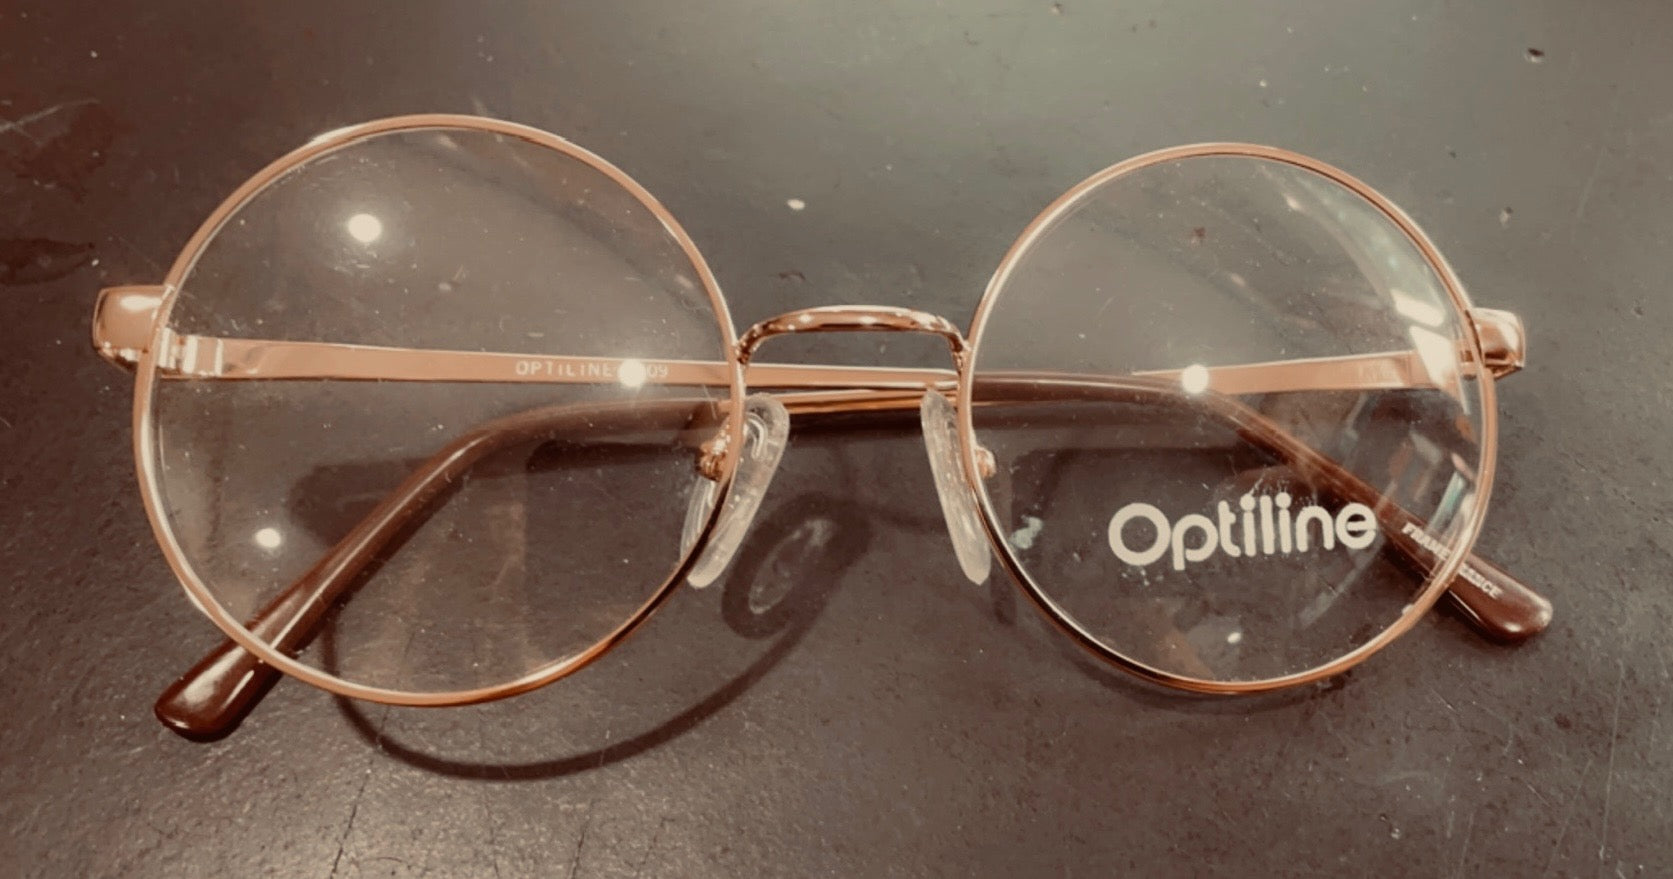 Optiline 1109 Perfectly Round Eyeglasses with Nose Pads